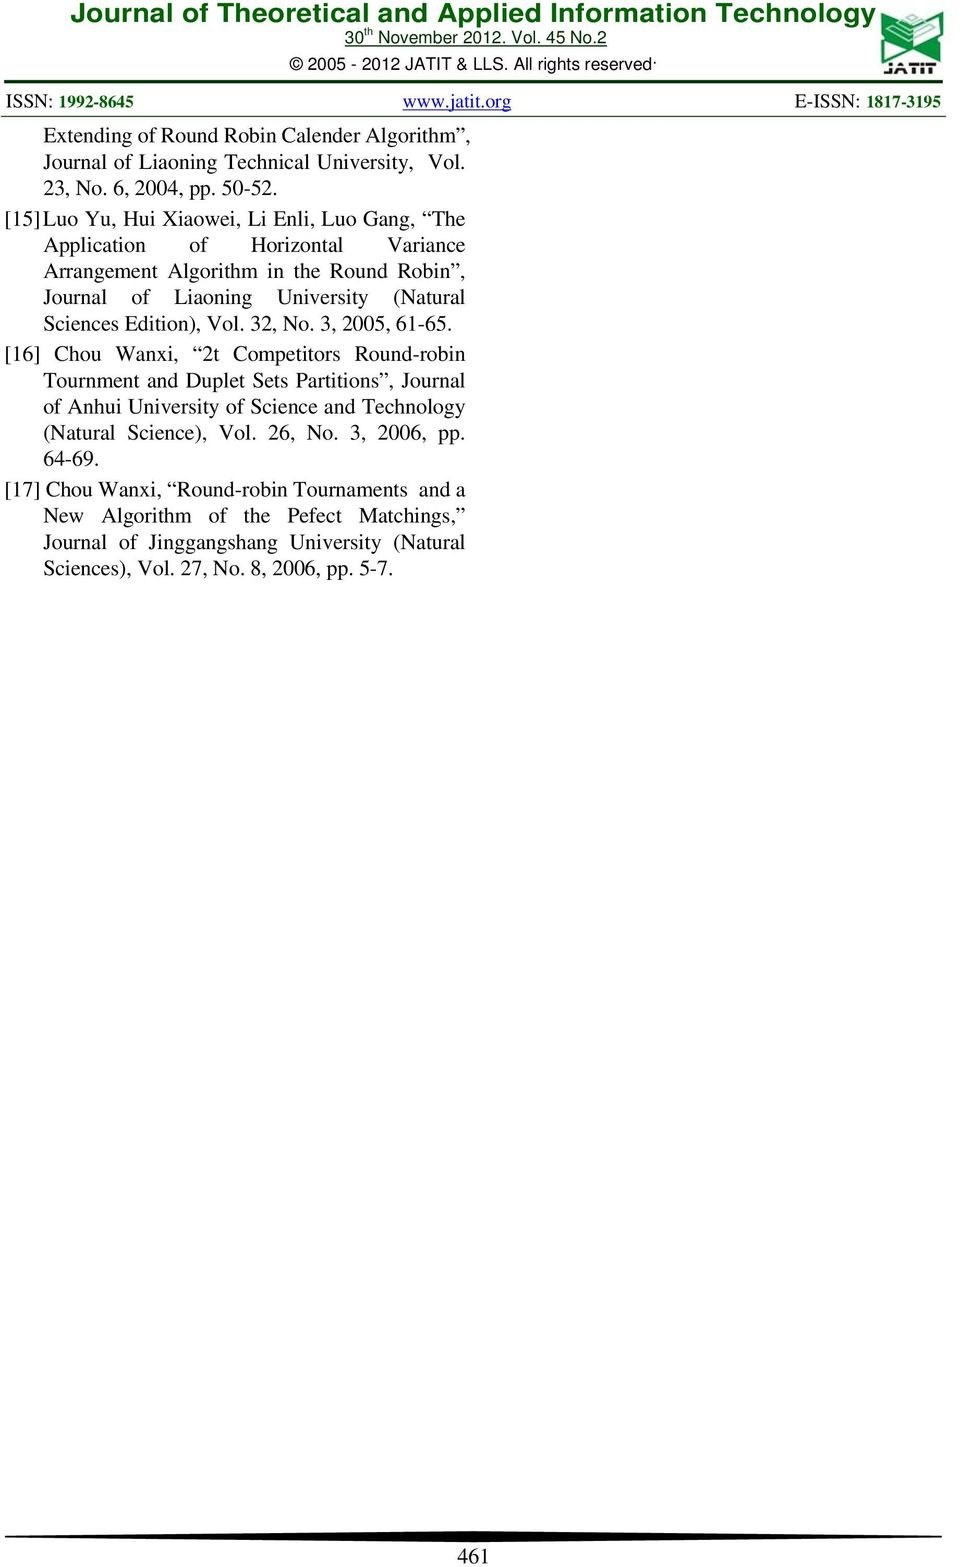 [15] Luo Yu, Hui Xiaowei, Li Enli, Luo Gang, The Application of Horizontal Variance Arrangement Algorithm in the Round Robin, Journal of Liaoning University (Natural Sciences Edition), Vol. 3, No.